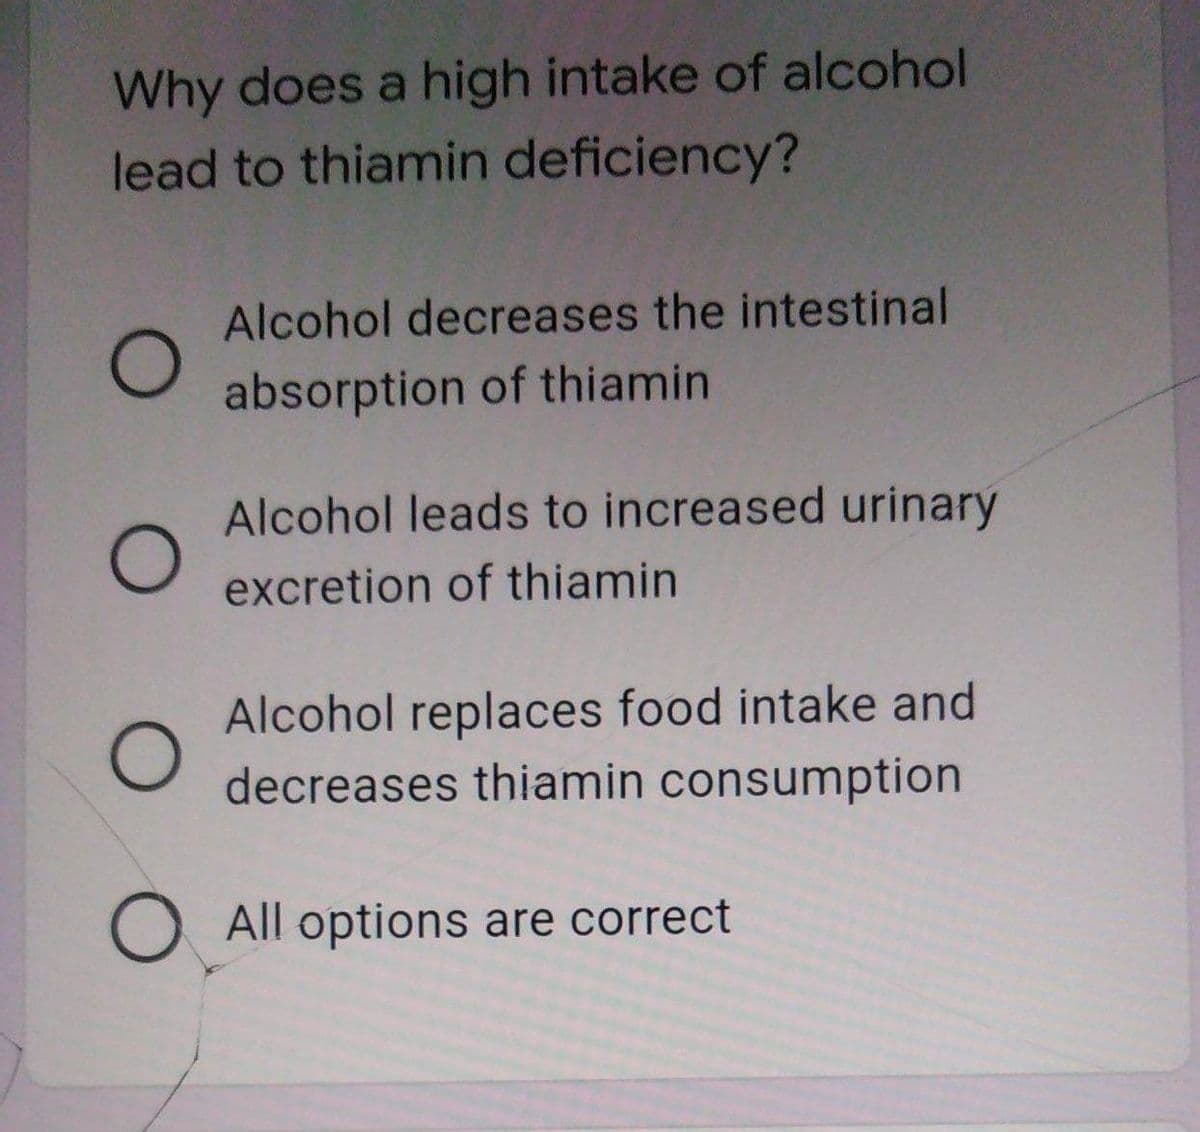 Why does a high intake of alcohol
lead to thiamin deficiency?
Alcohol decreases the intestinal
absorption of thiamin
Alcohol leads to increased urinary
excretion of thiamin
Alcohol replaces food intake and
decreases thiamin consumption
O All options are correct
